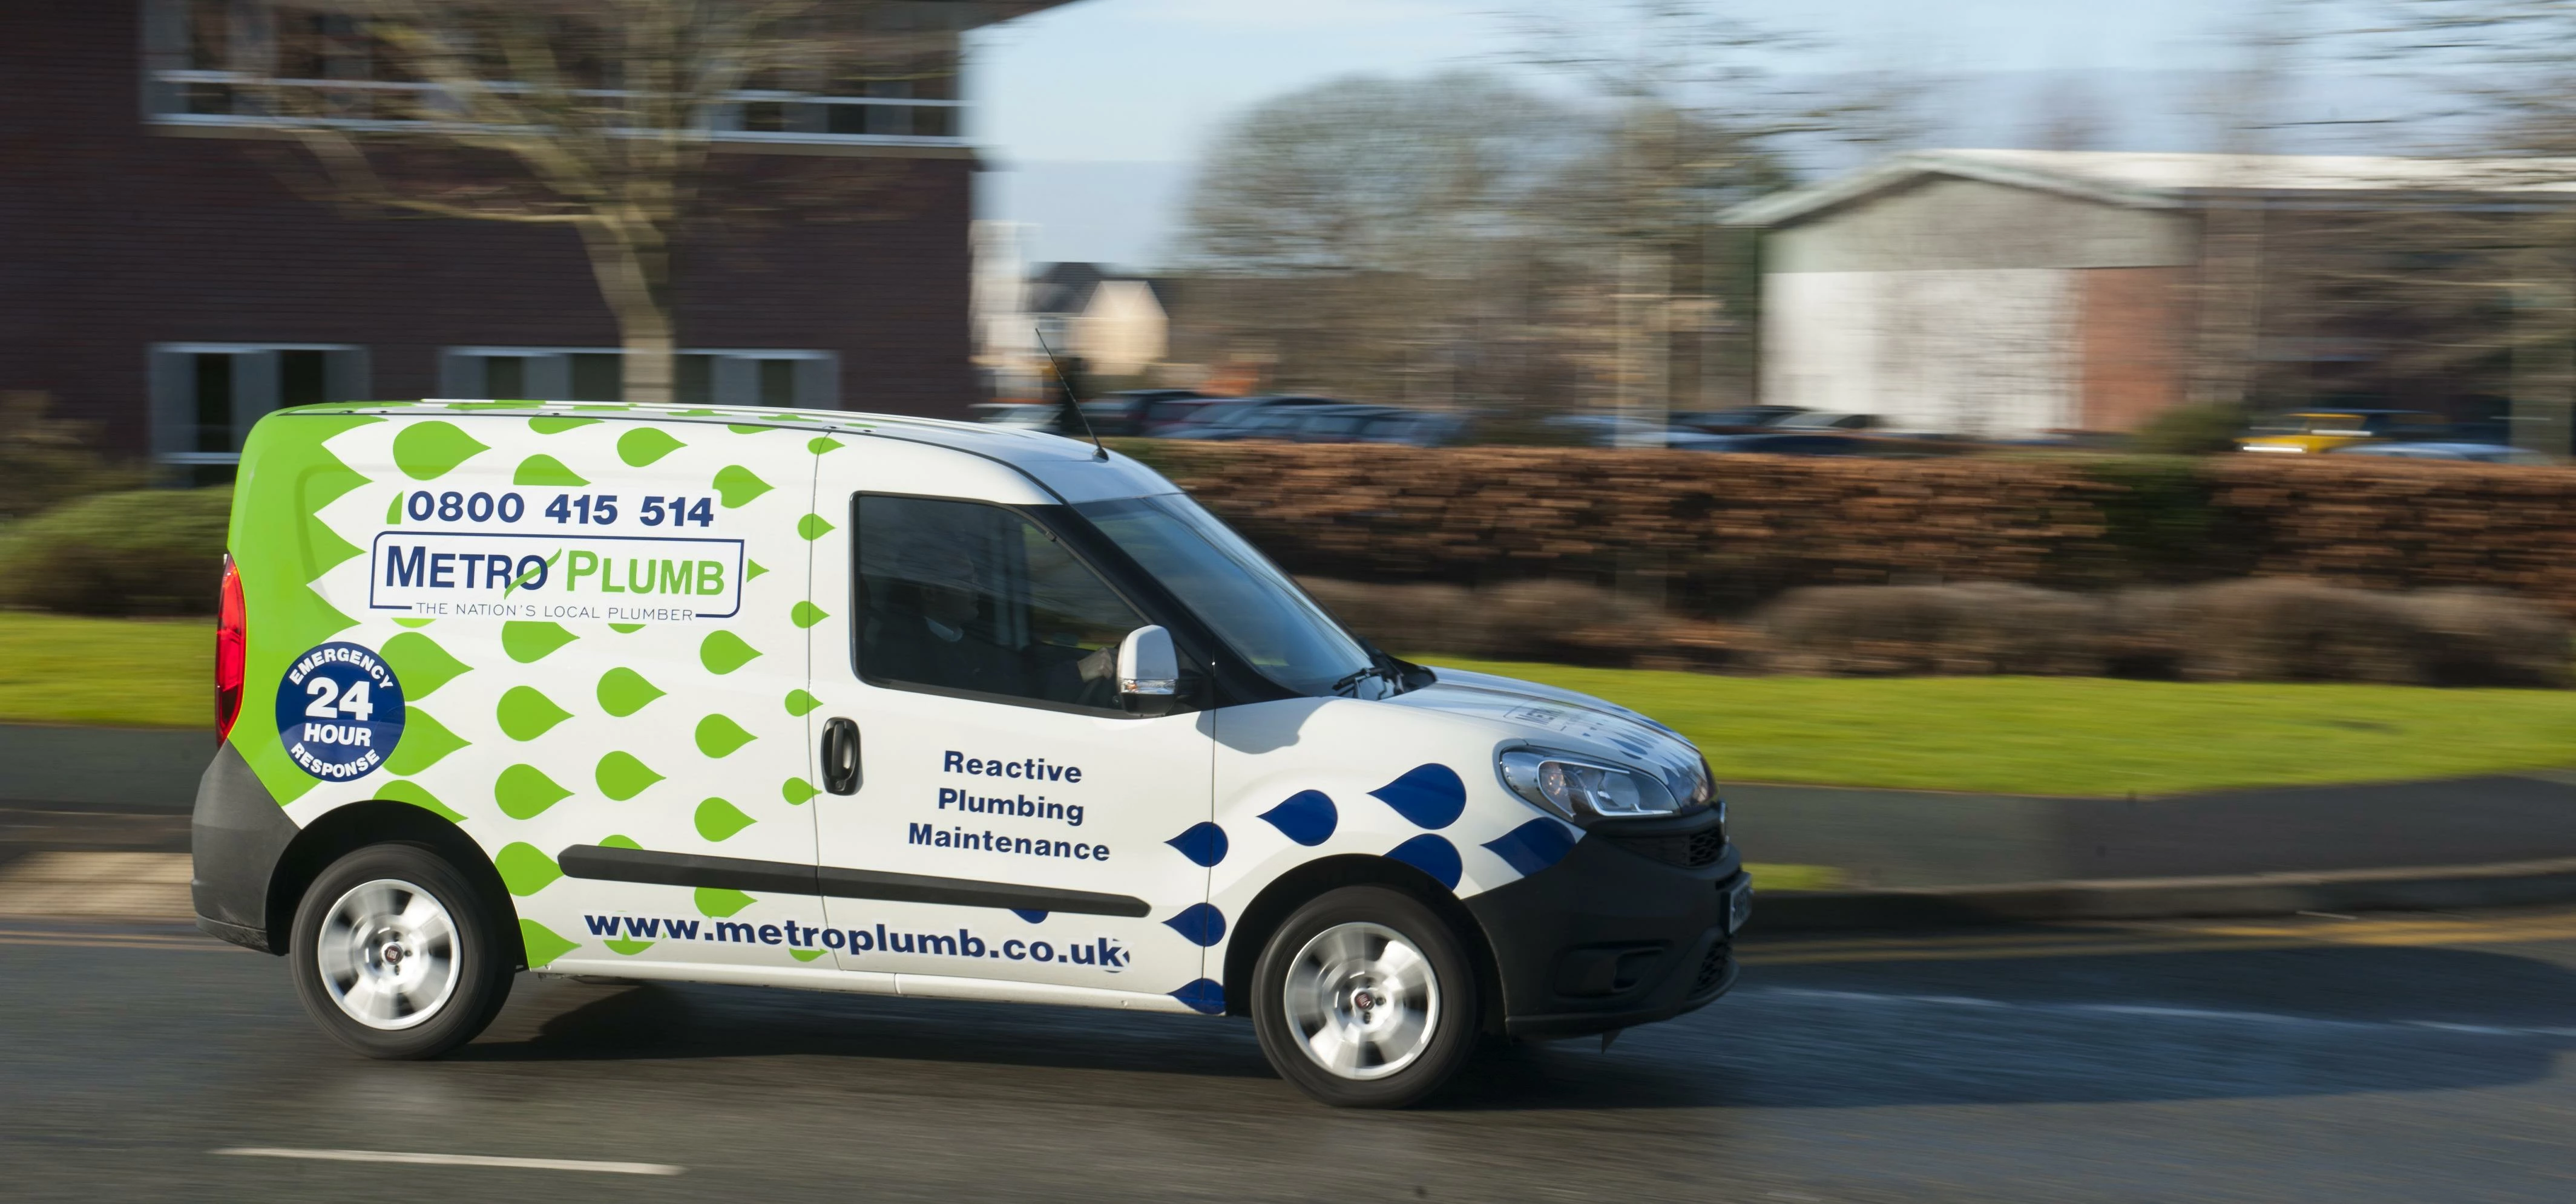 New national plumbing service launched